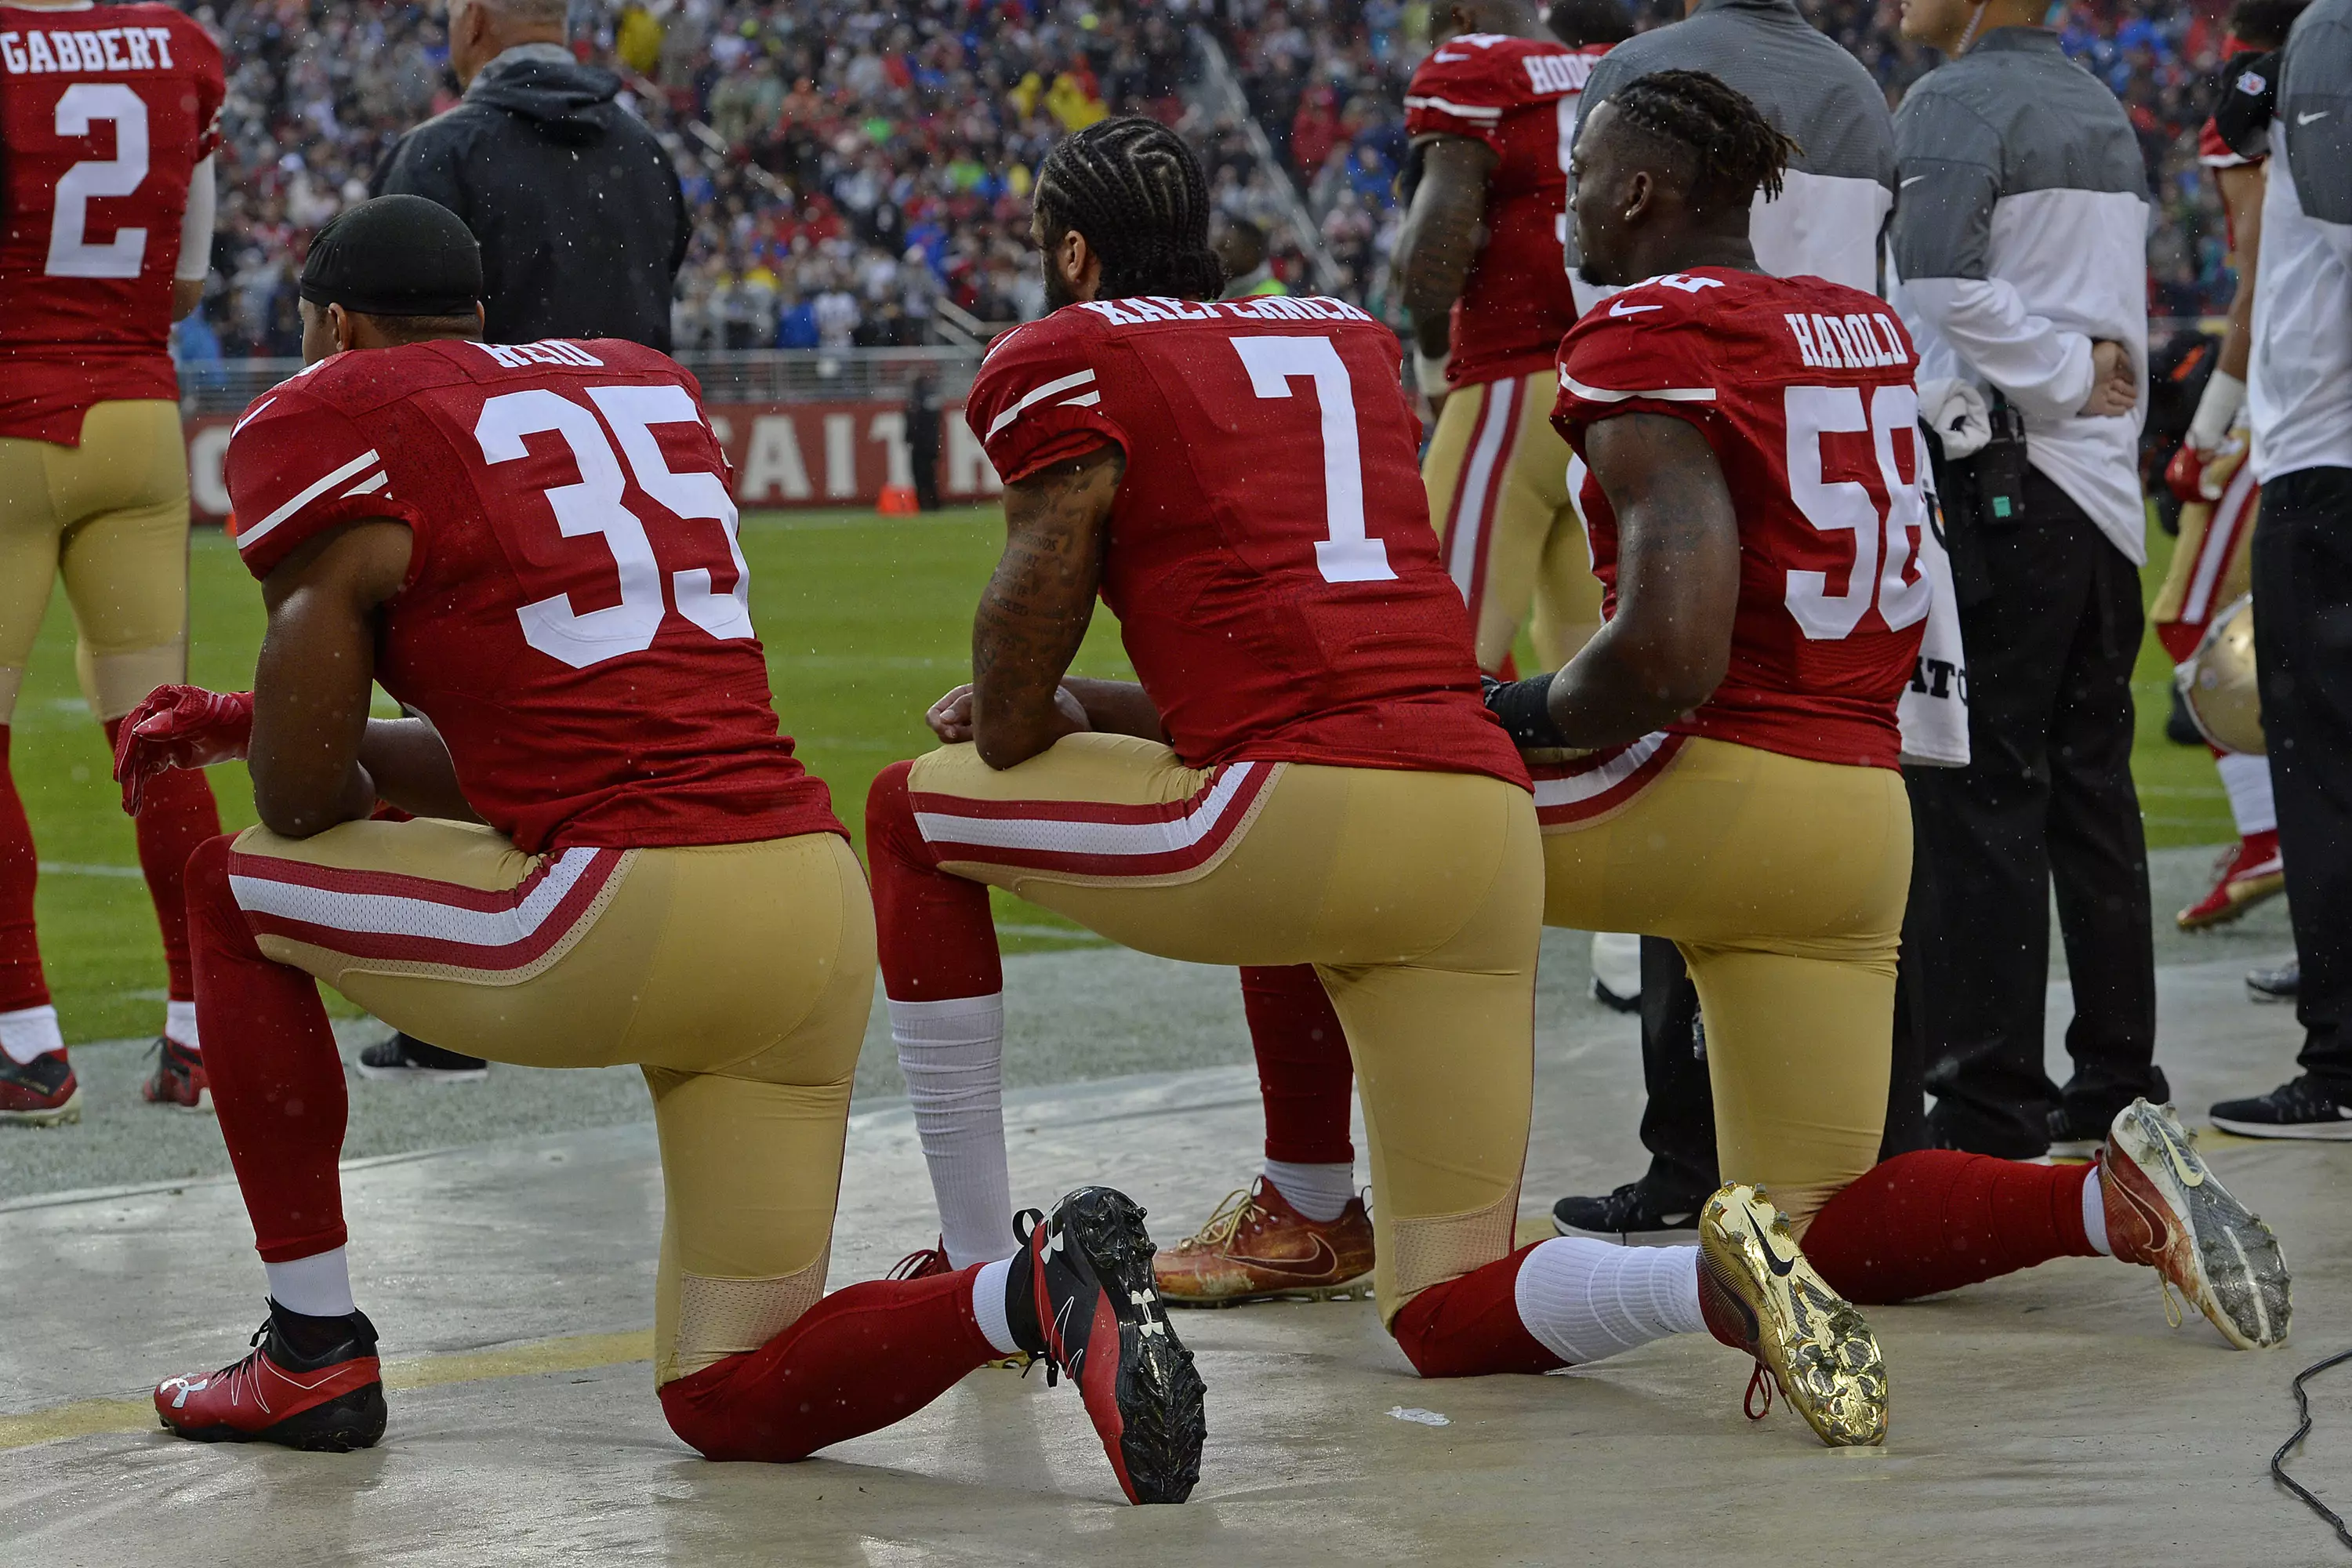 Colin Kaepernick first took a knee in the NFL in a stand against police brutality and racial injustices.